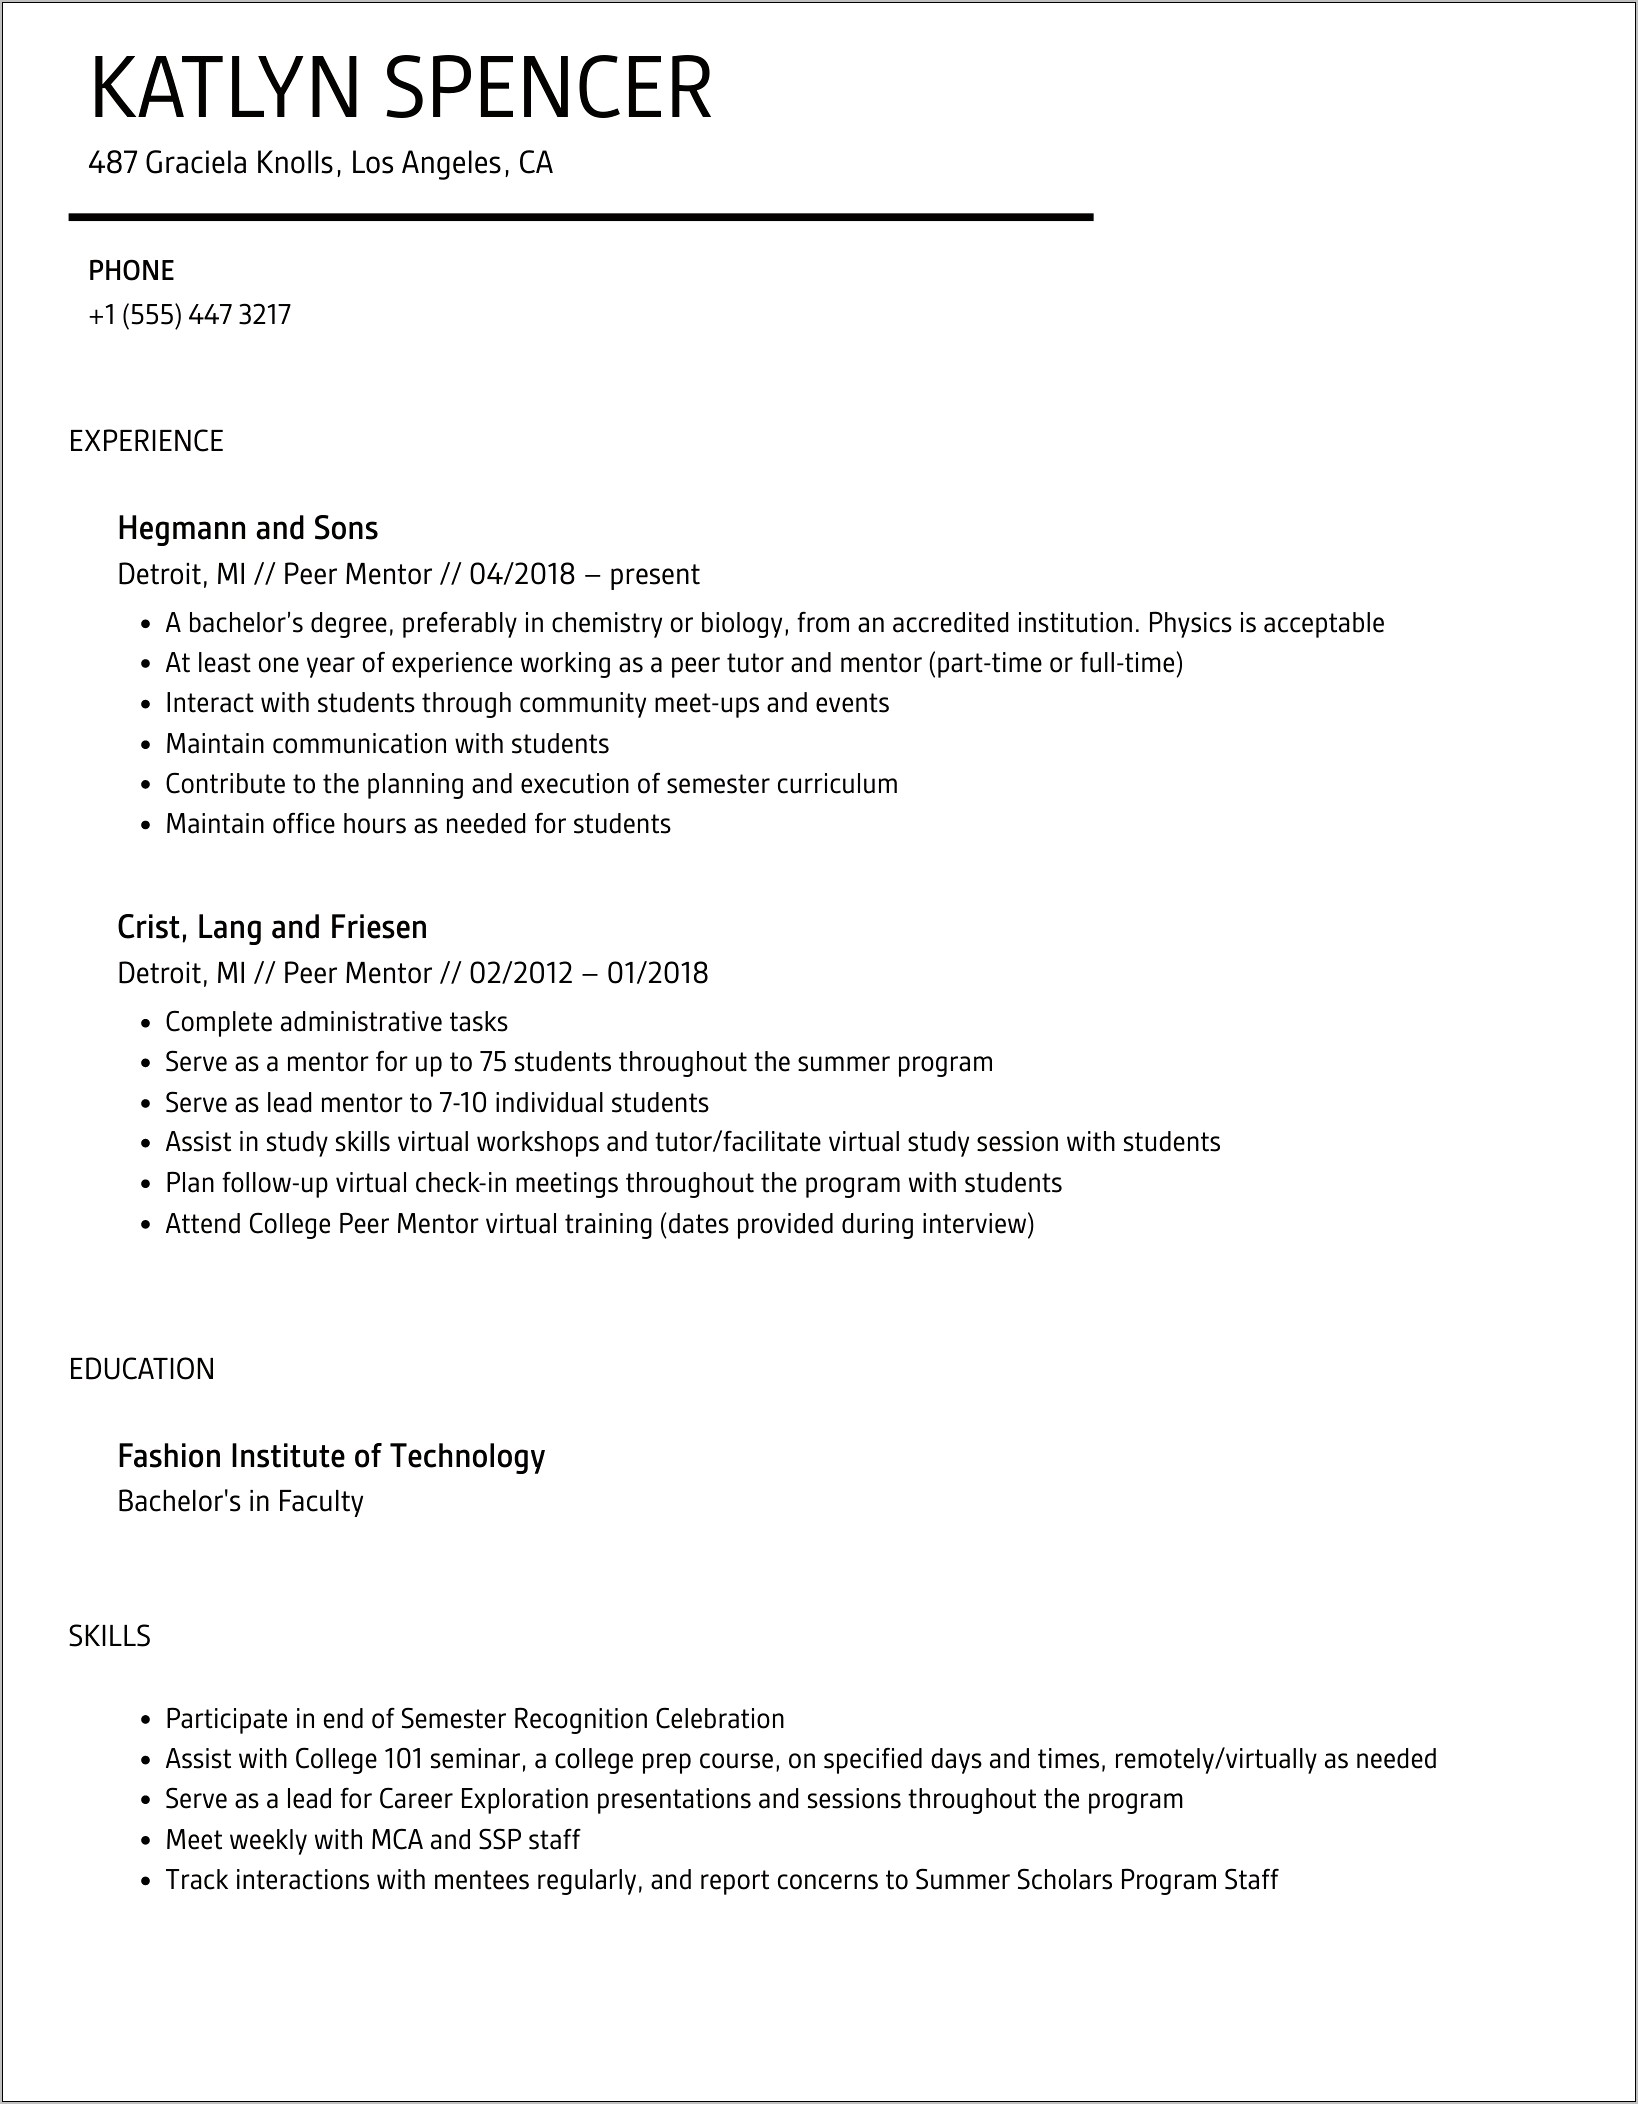 Resume Objective Examples For Mentoring